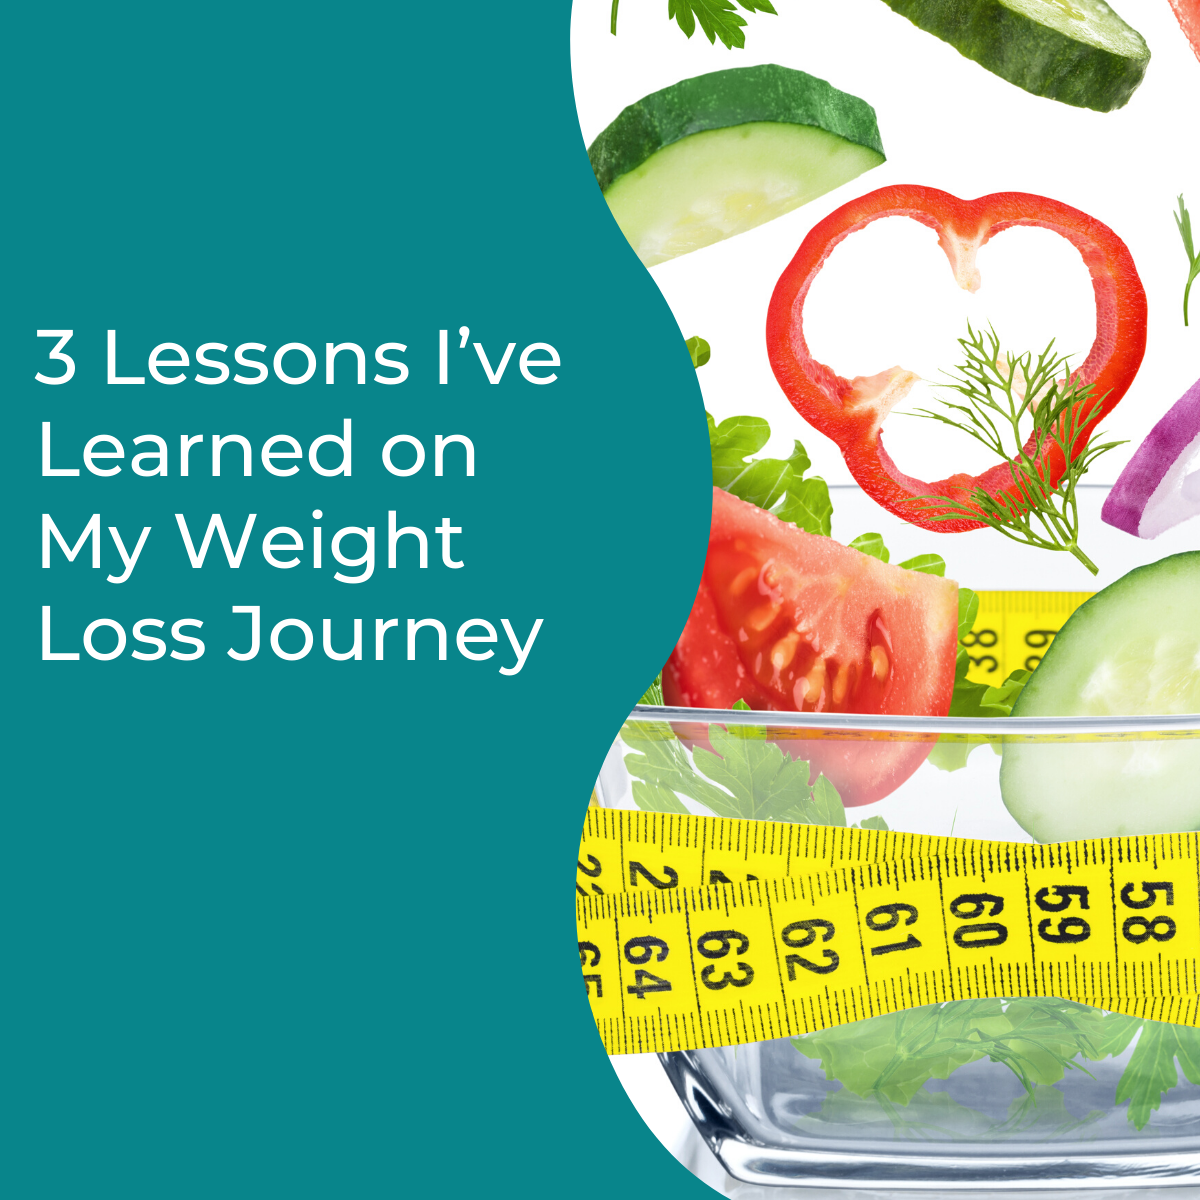 10 Lessons I Learned from My Weight-Loss Journey